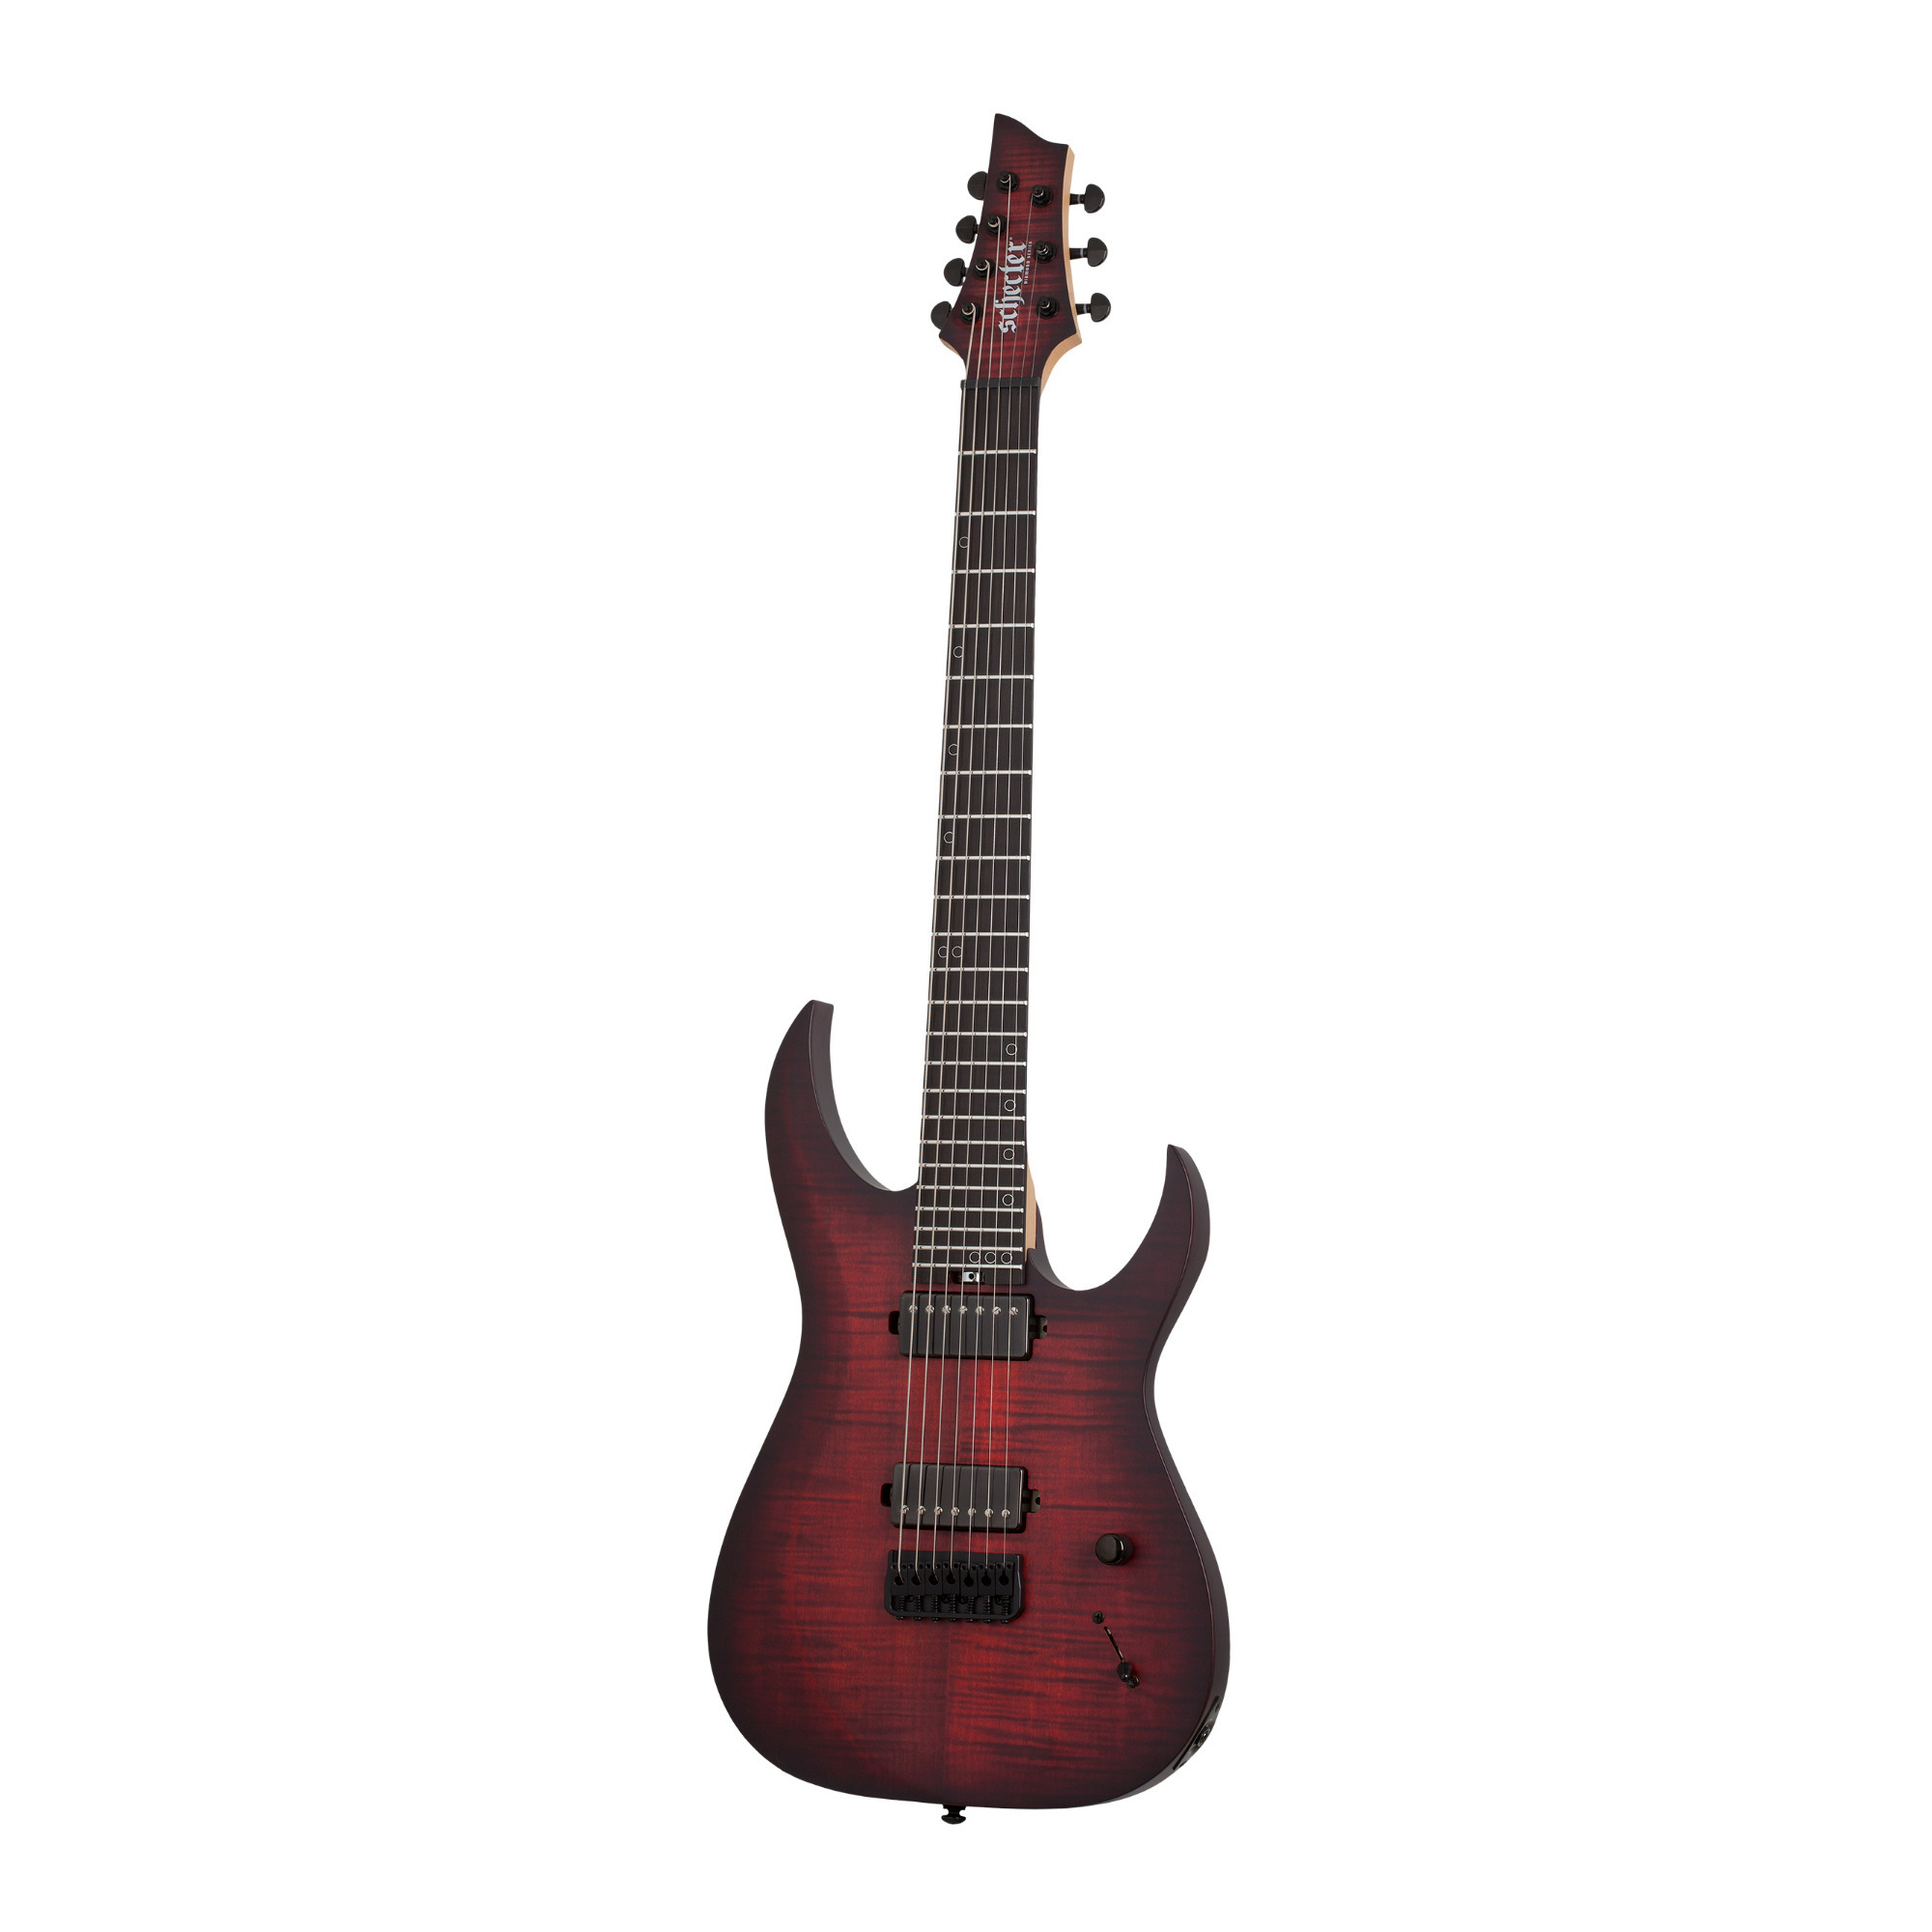 Schecter Sunset-7 Extreme 7-String Nyatoh Body Electric Guitar (Right-Handed, Scarlet Burst) in Red/Black -  SGR-2573